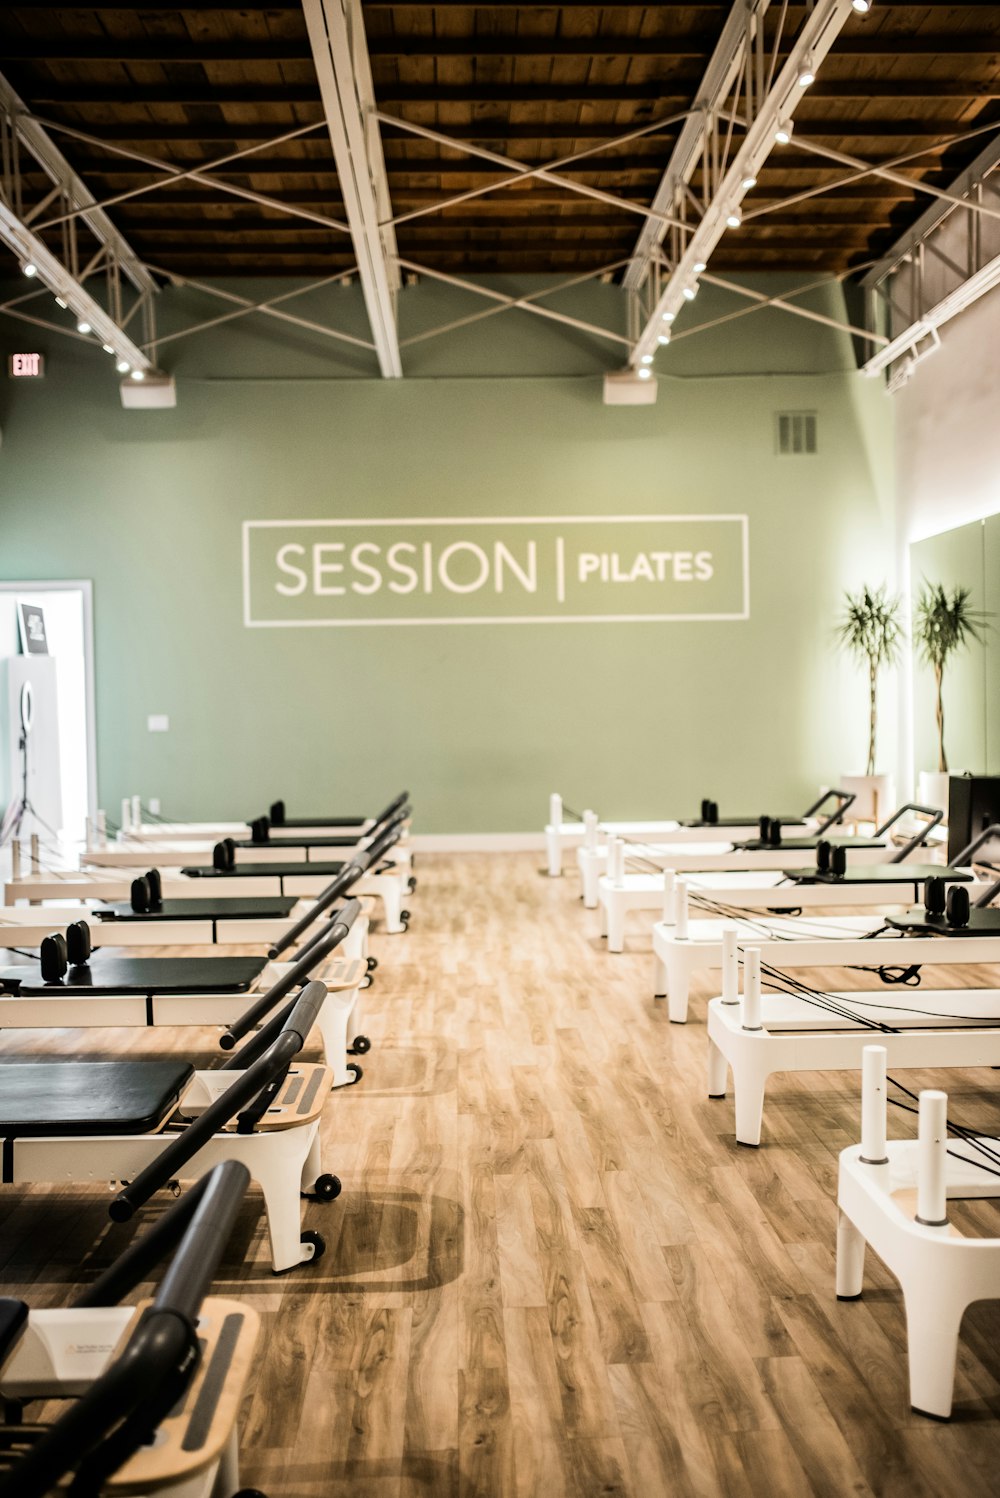 3,624 Pilates Reformer Poses Images, Stock Photos, 3D objects